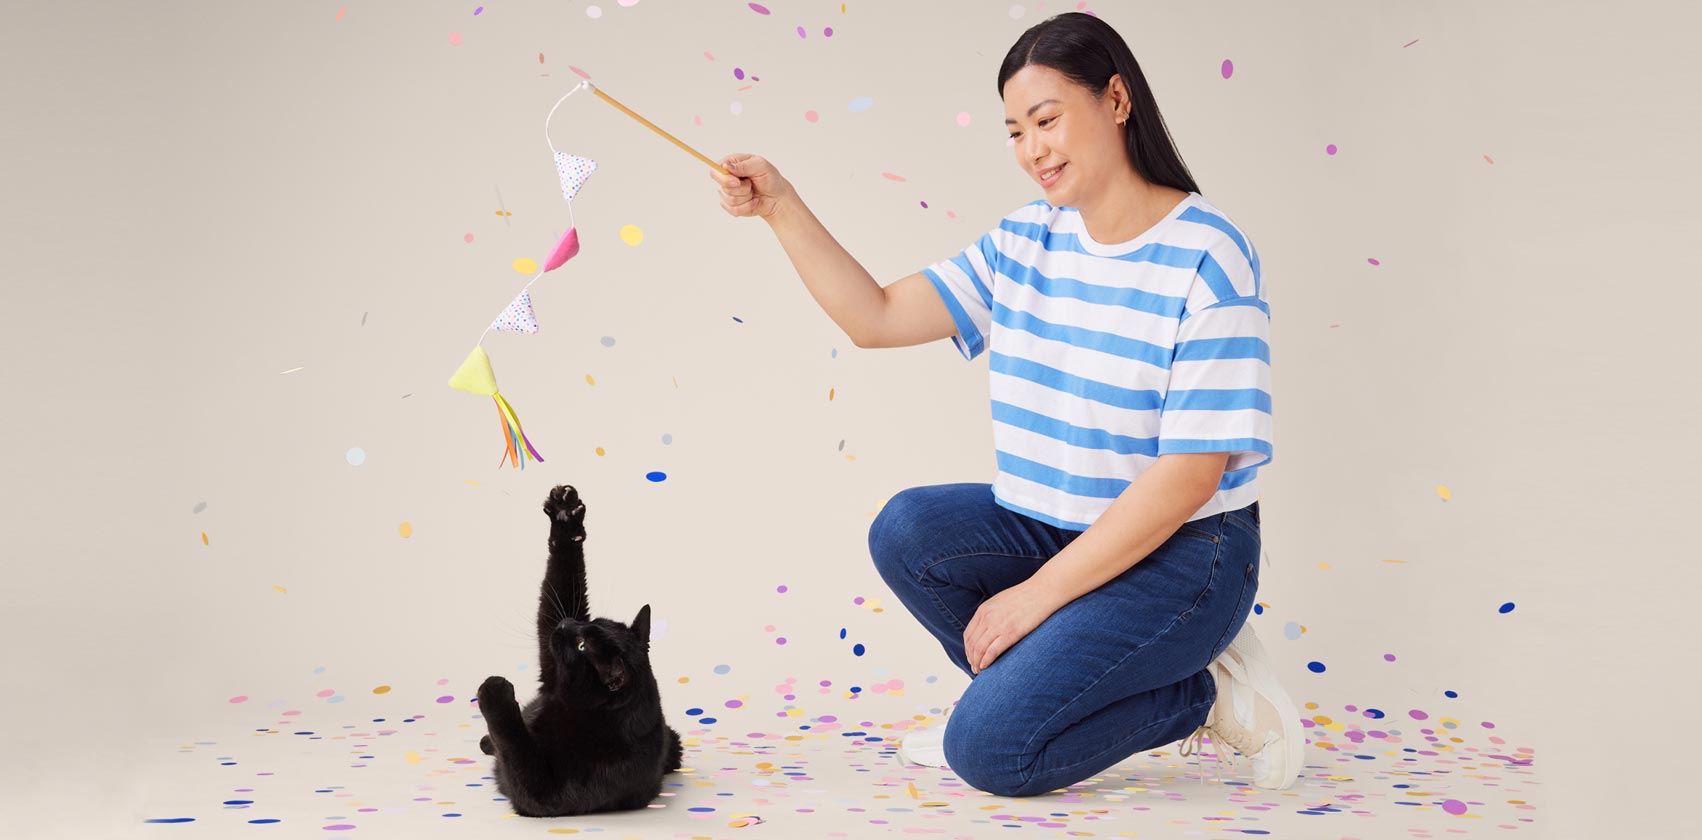 Fun ways to celebrate special occasions with your pet - A cat playing with the owner